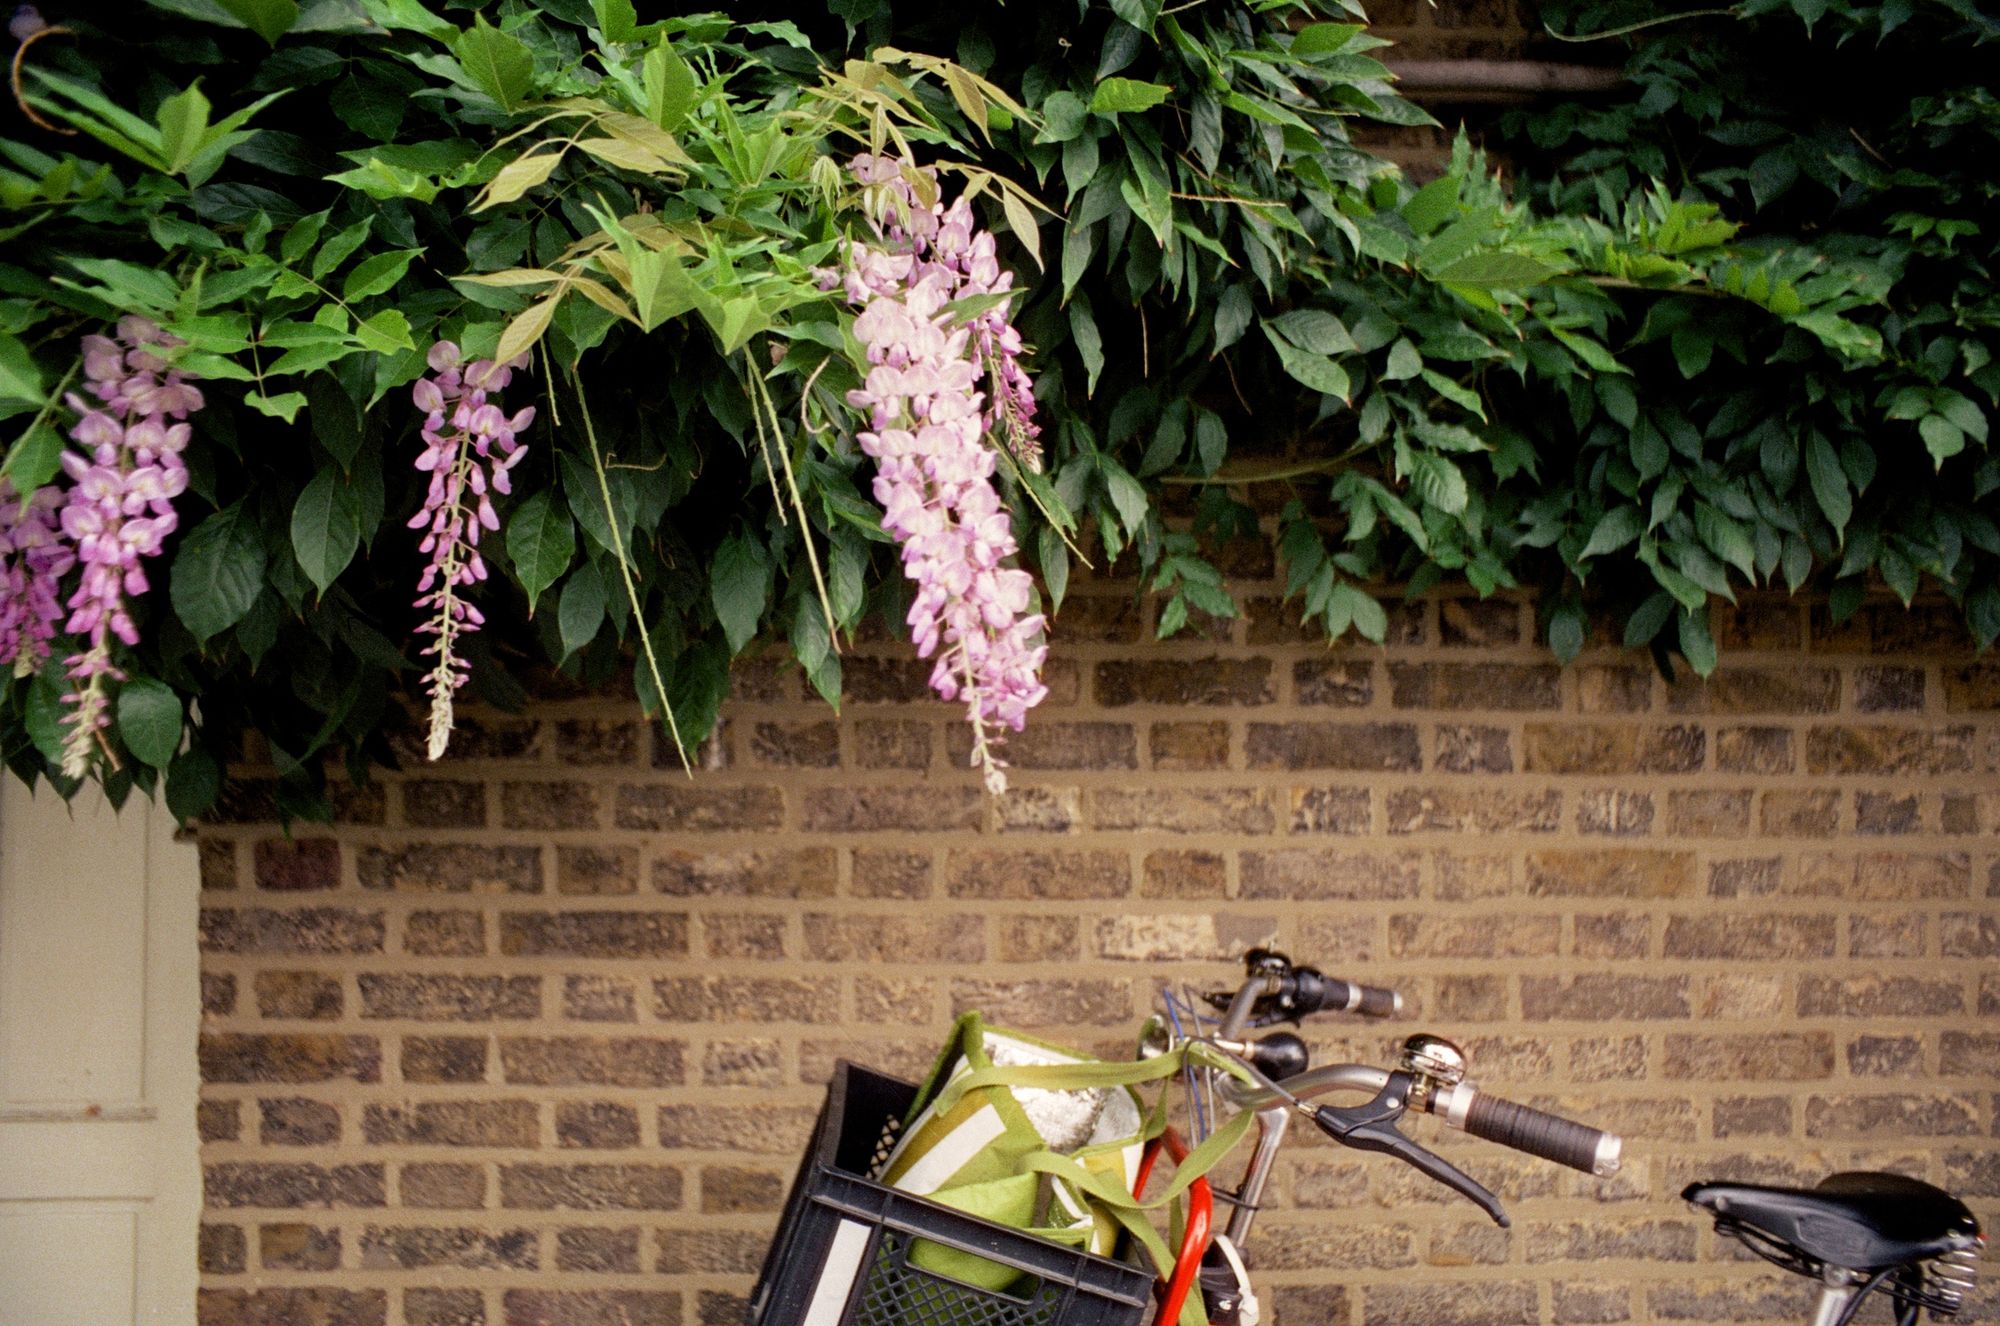 A Dutch bicycle on its kickstand against a brick wall with a white door, below a large wisteria plant with some large late flowers.